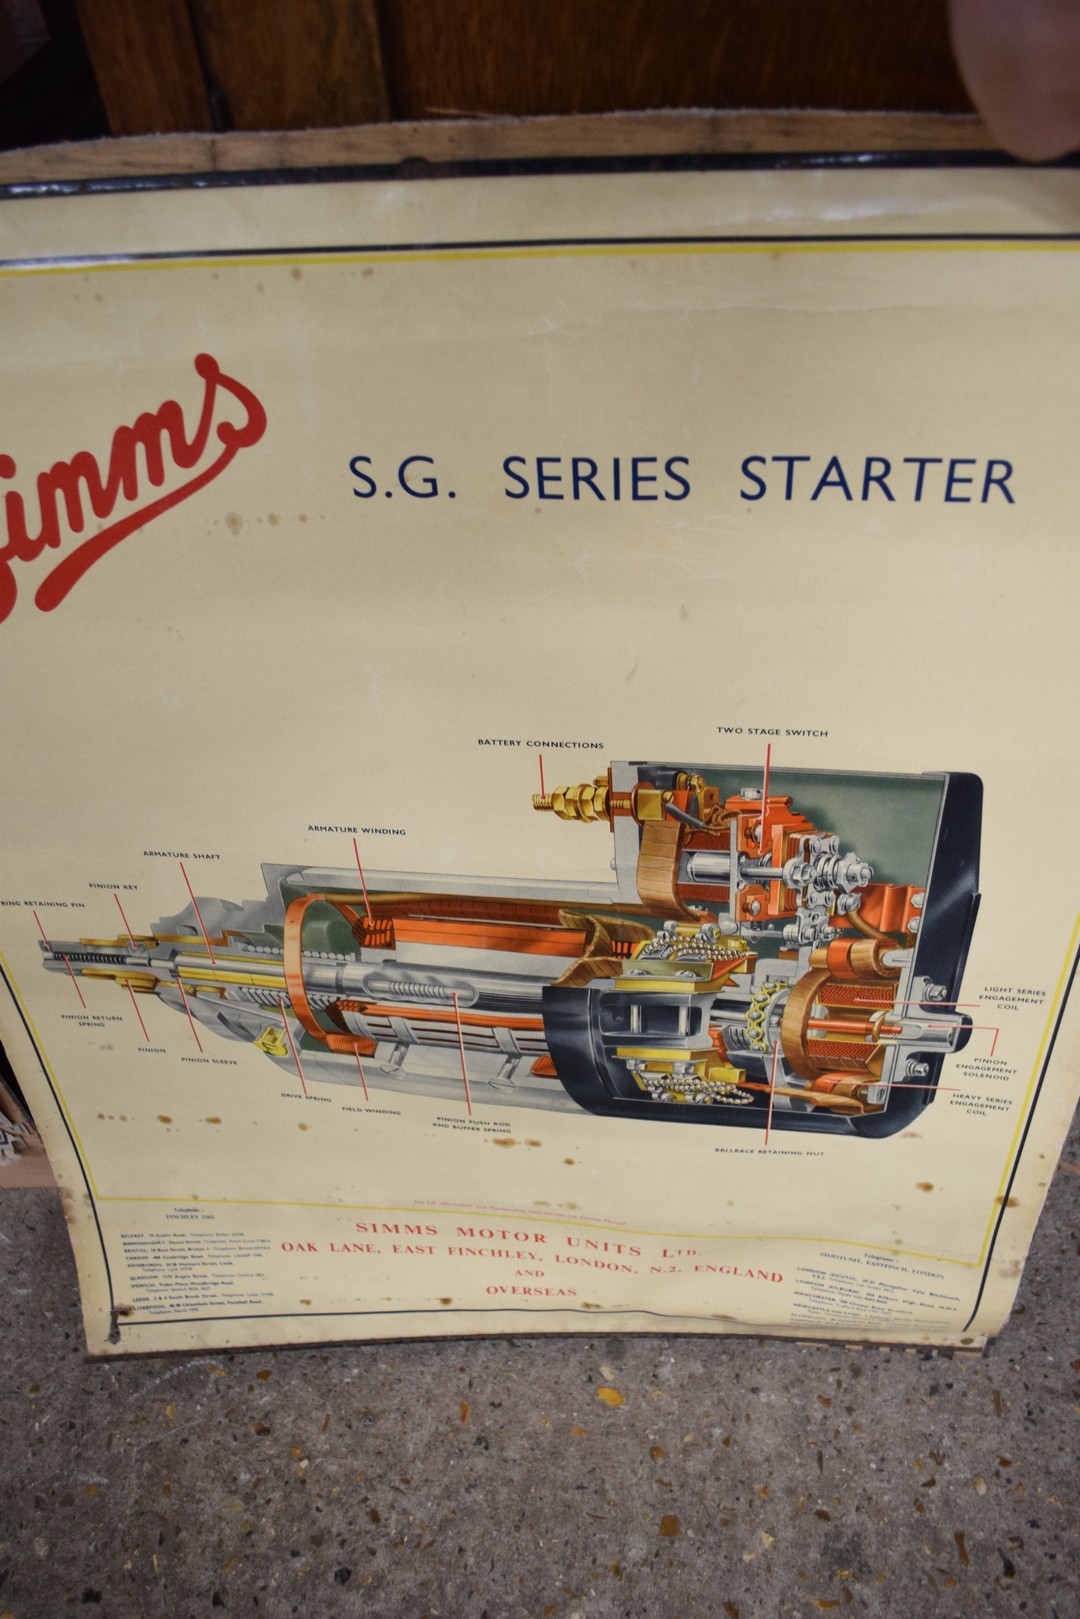 SIMMS SG SERIES STARTER MOTOR ADVERTISING PRINT FROM EAST FINCHLEY, LONDON